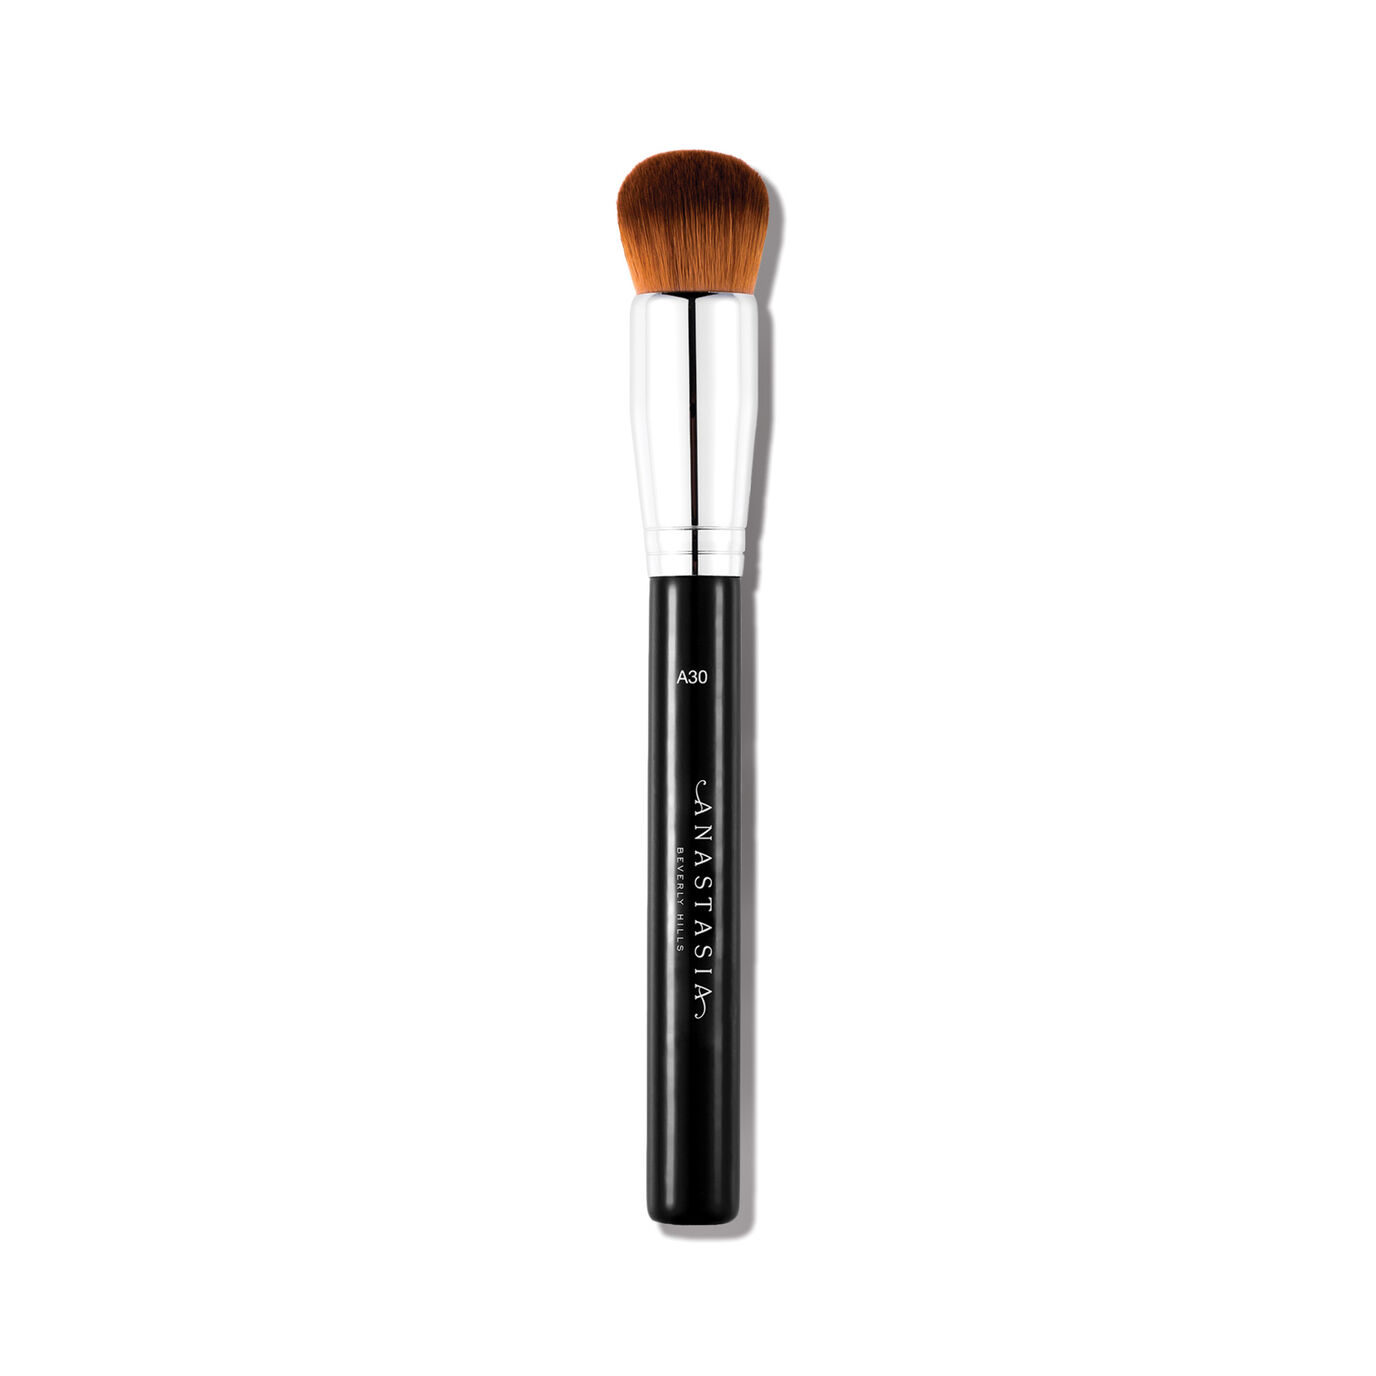 Shop The Latest Collection Of Anastasia Beverly Hills A30 Pro Brush In Lebanon